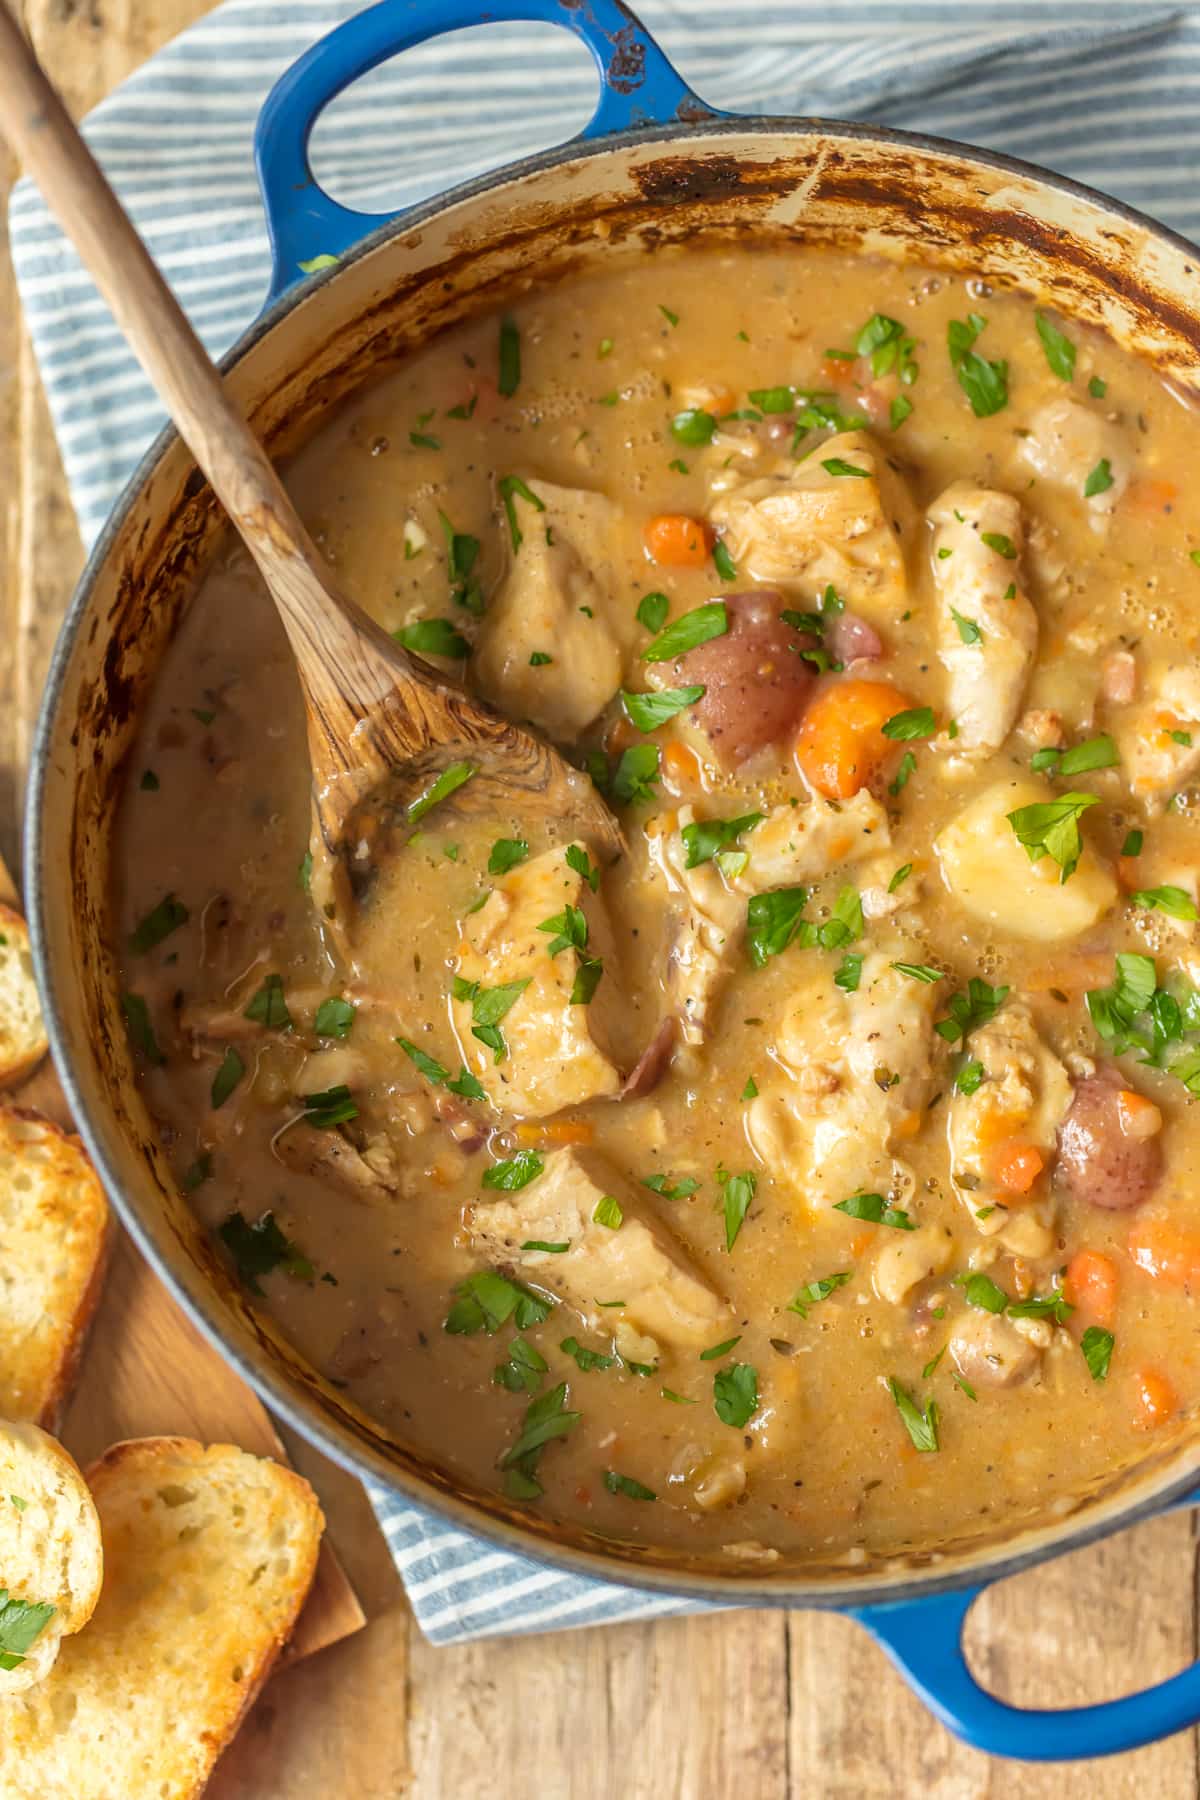 WHITE WINE CHICKEN STEW has all of the flavor and none of the fuss! Such a delicious comfort food...the perfect soup for a cold Winter night! The flavors in this chicken stew are INCREDIBLE!